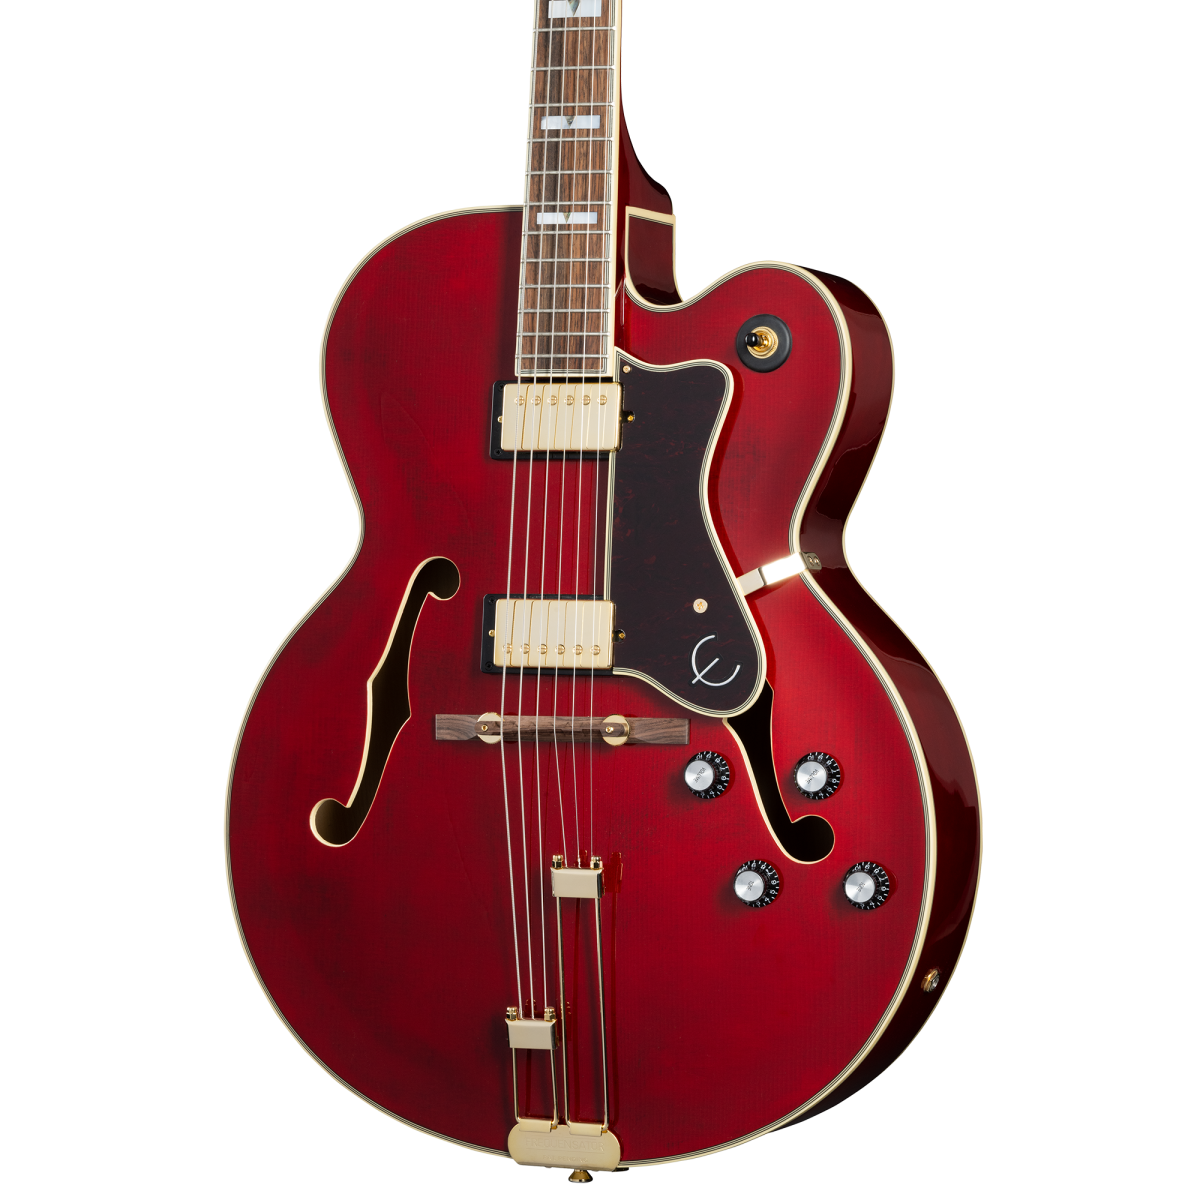 Epiphone Broadway Hollowbody Electric Guitar - Wine Red | Zoso Music Sdn Bhd